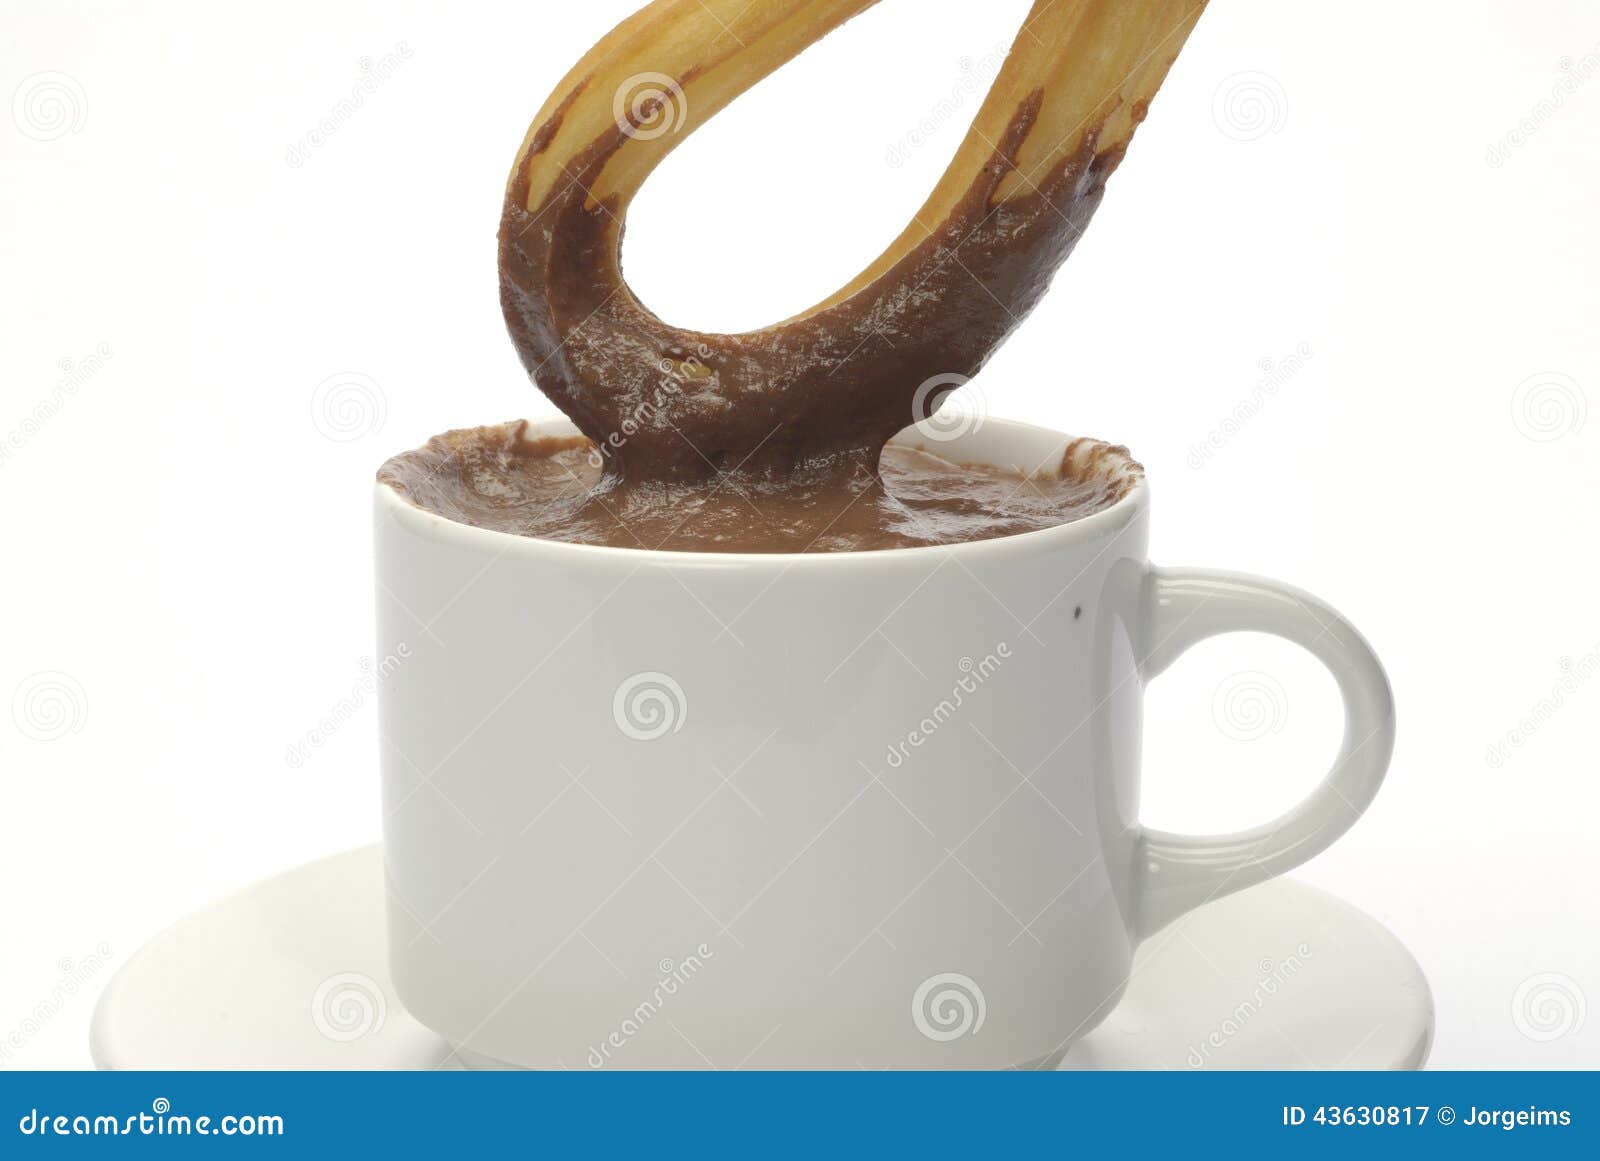 one churro over a cup of chocolate, detail